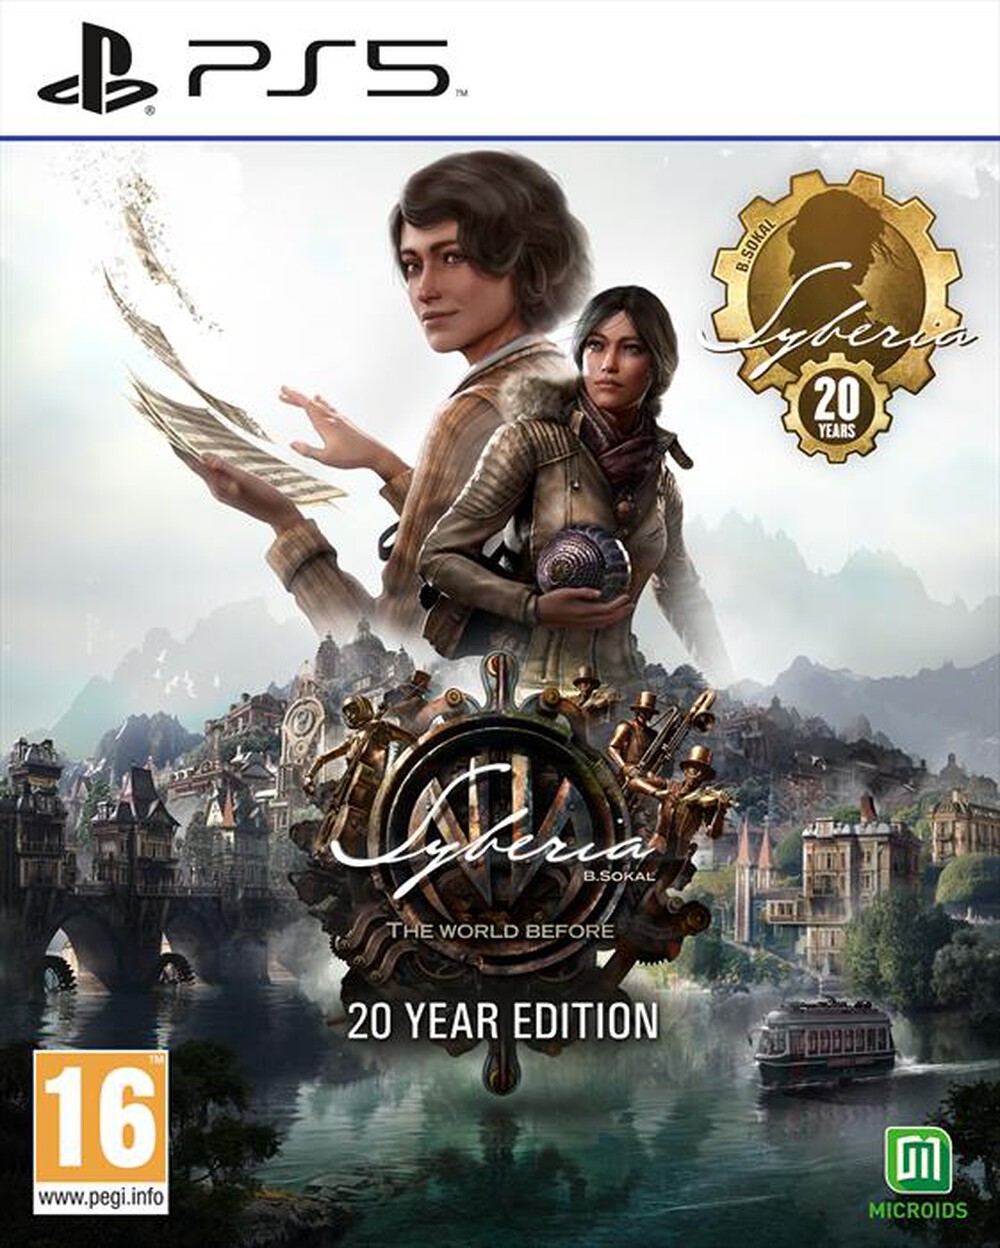 "MICROIDS - SYBERIA - THE WORLD BEFORE LIMITED EDITION"